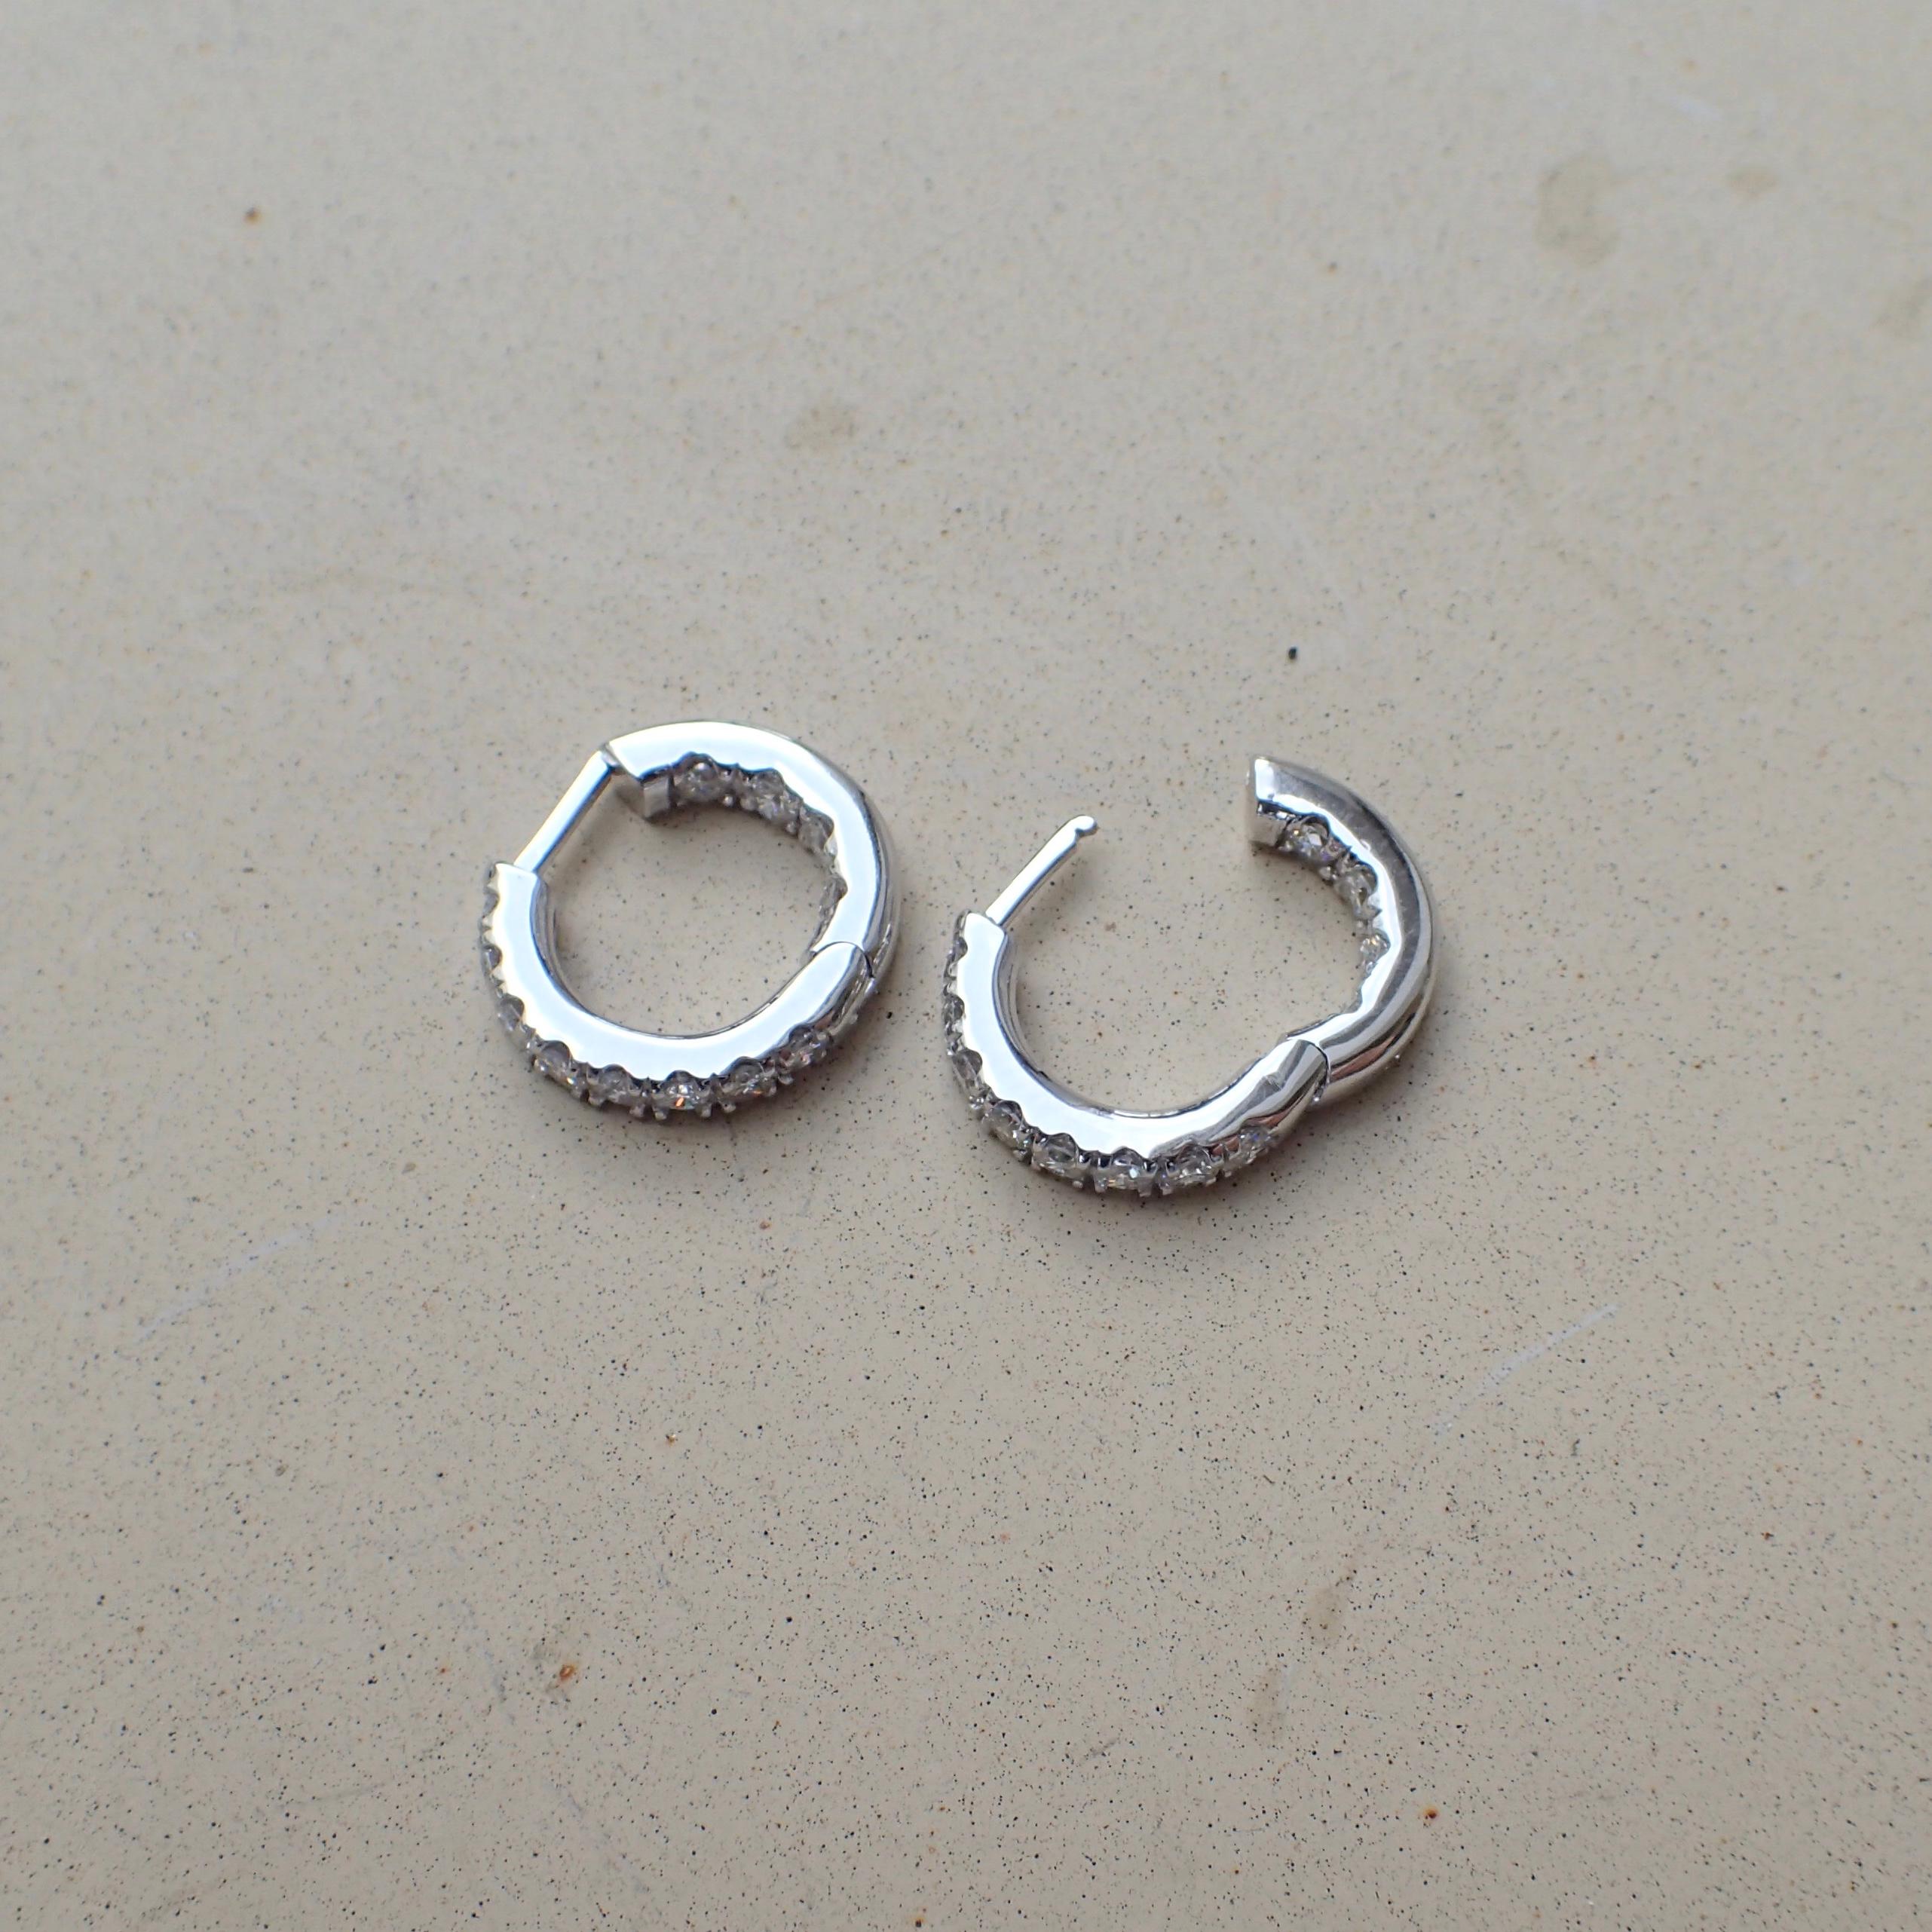 Contemporary 18 Karat White Gold Hoop Earrings are Set with 1.18 Carat of Diamond For Sale